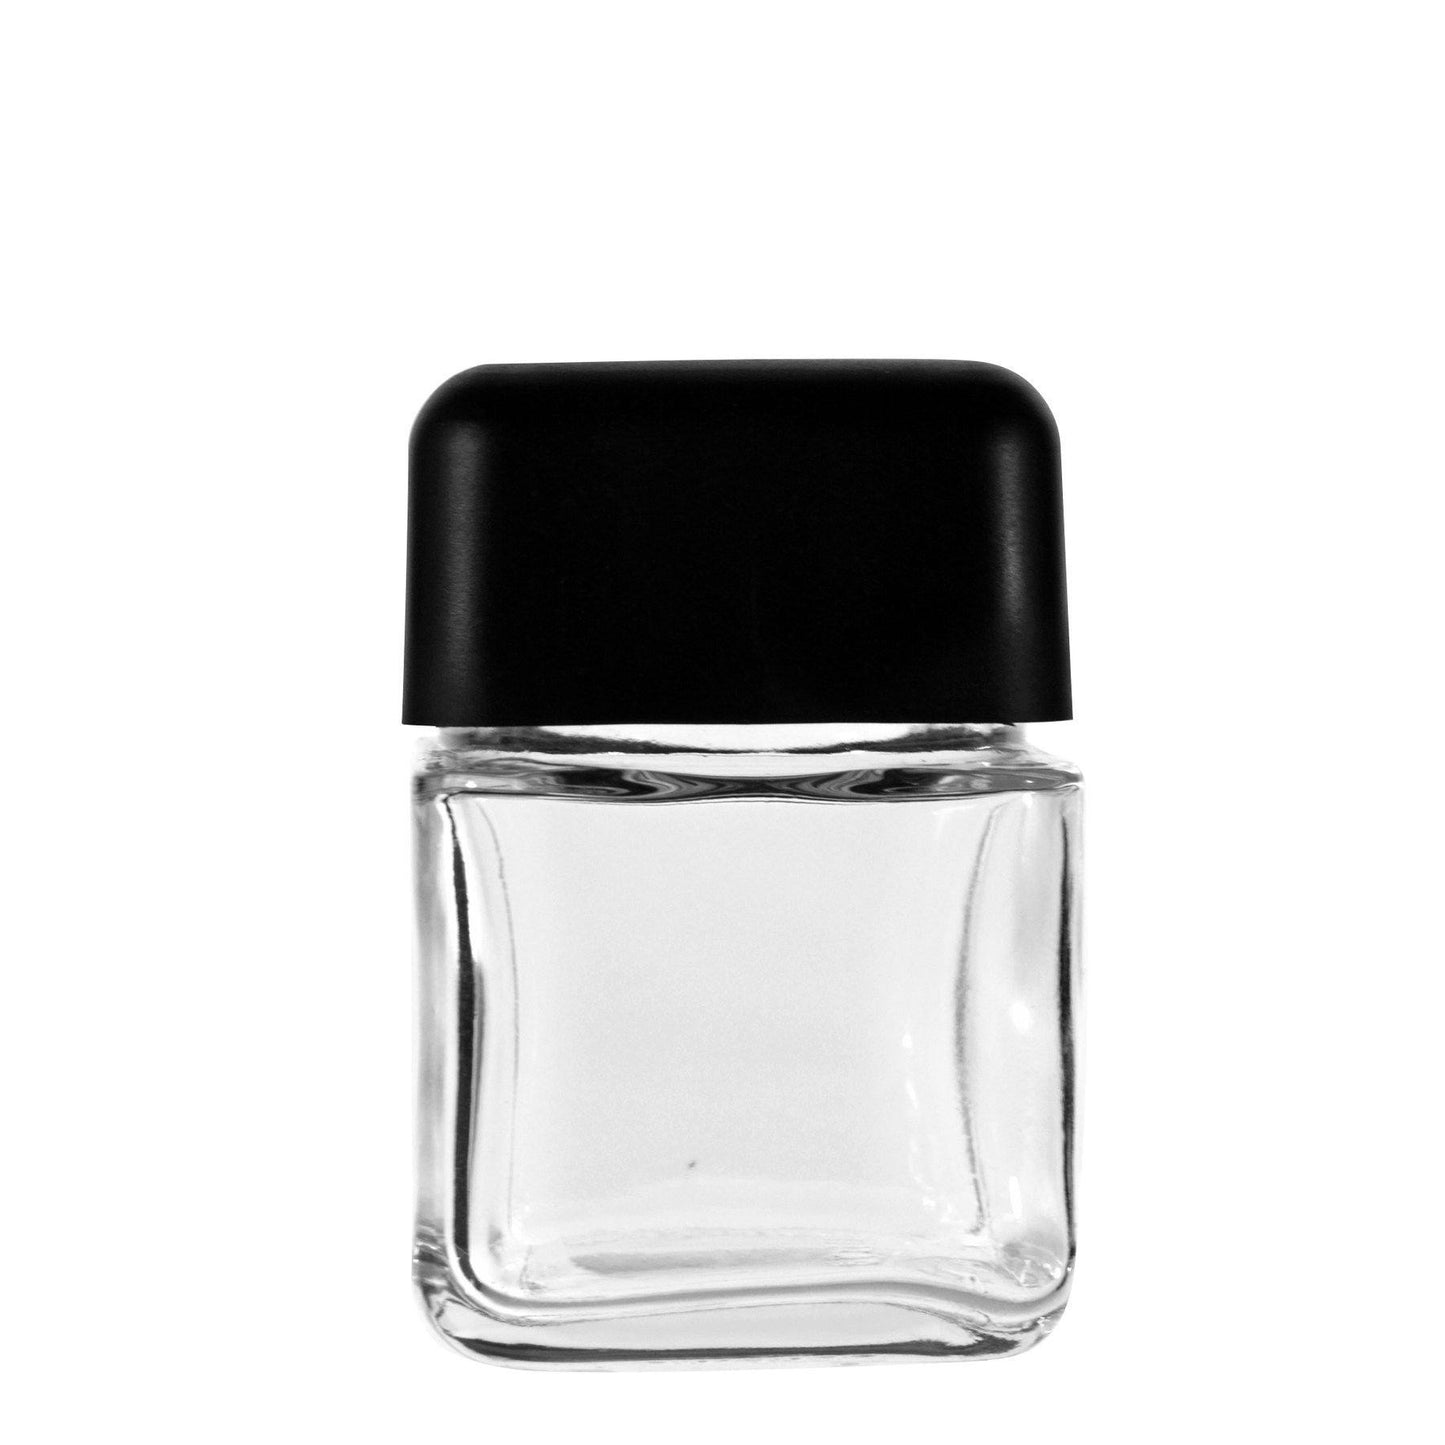 3oz Square Clear Glass Jars With Black Lid Child Resistant (80 Count) at Flower Power Packages